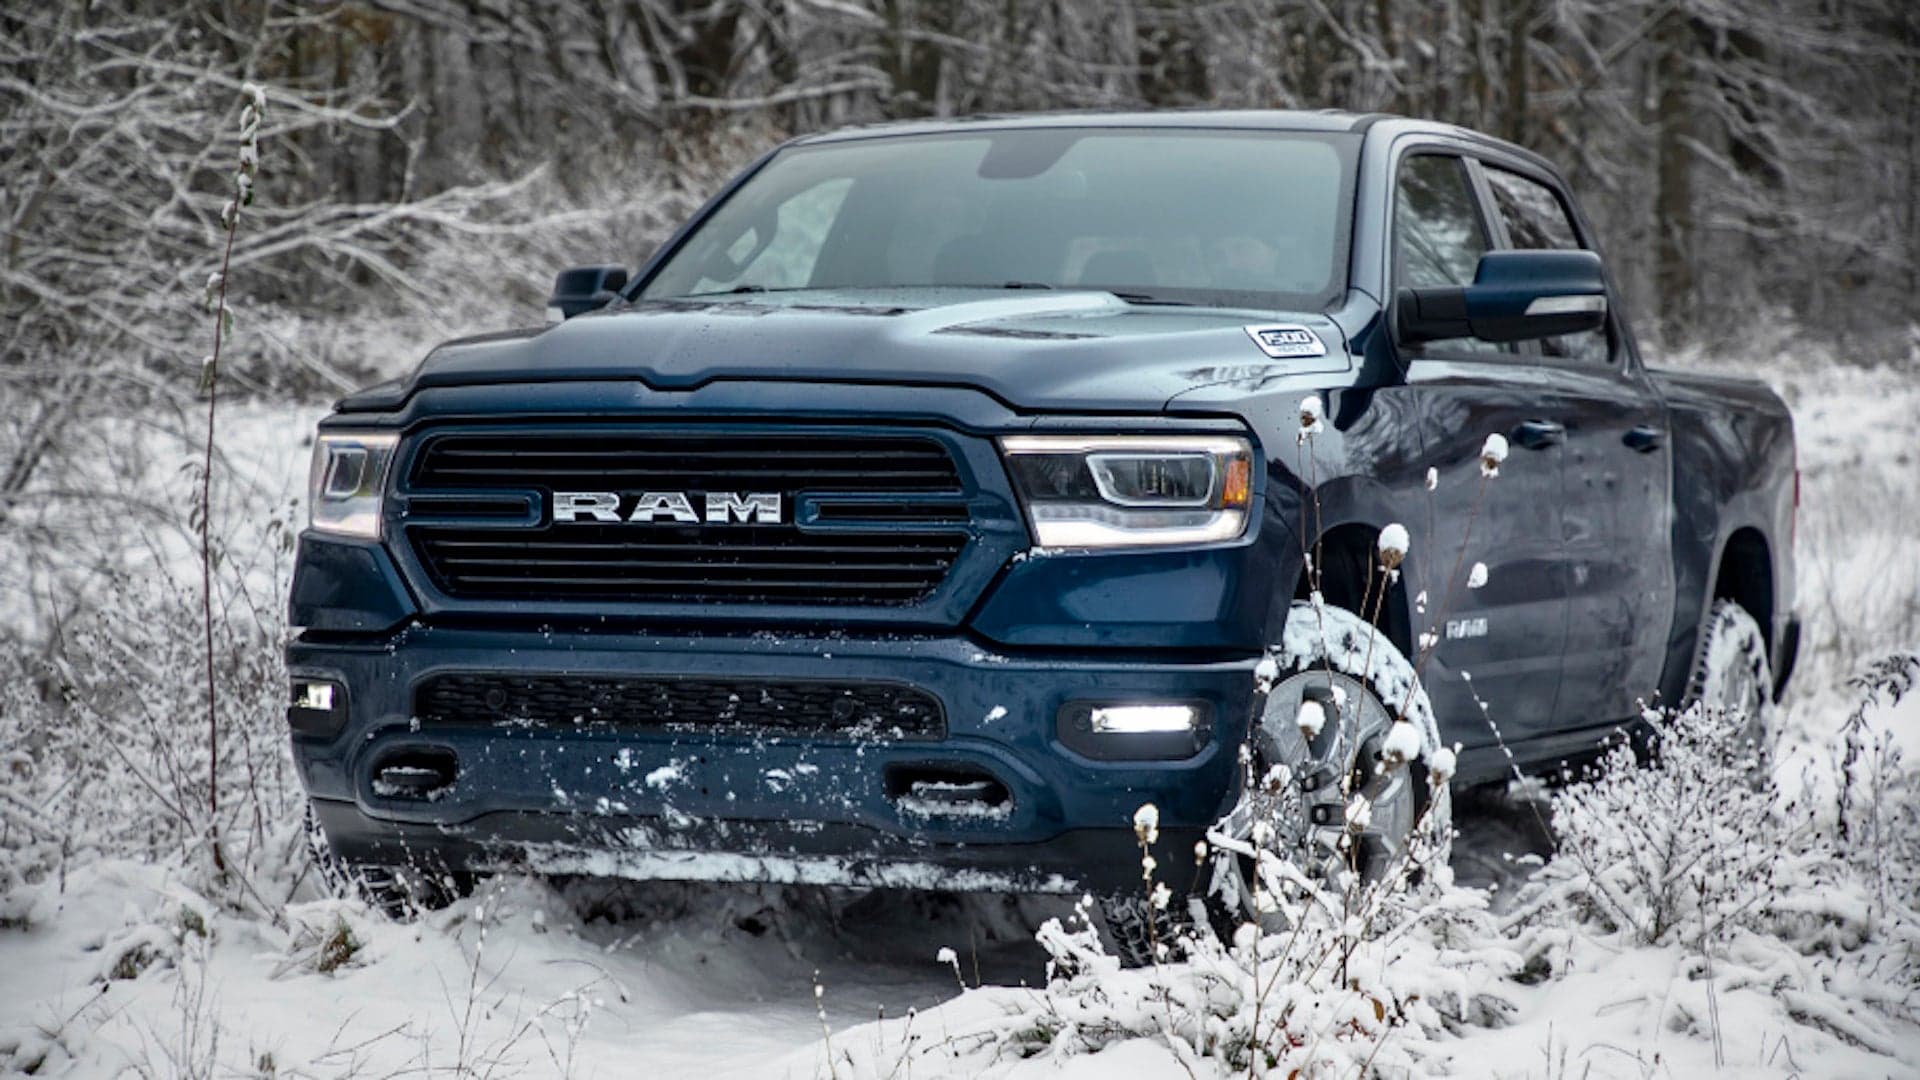 New 2019 Ram 1500 North Edition: Tackling Winter in Style